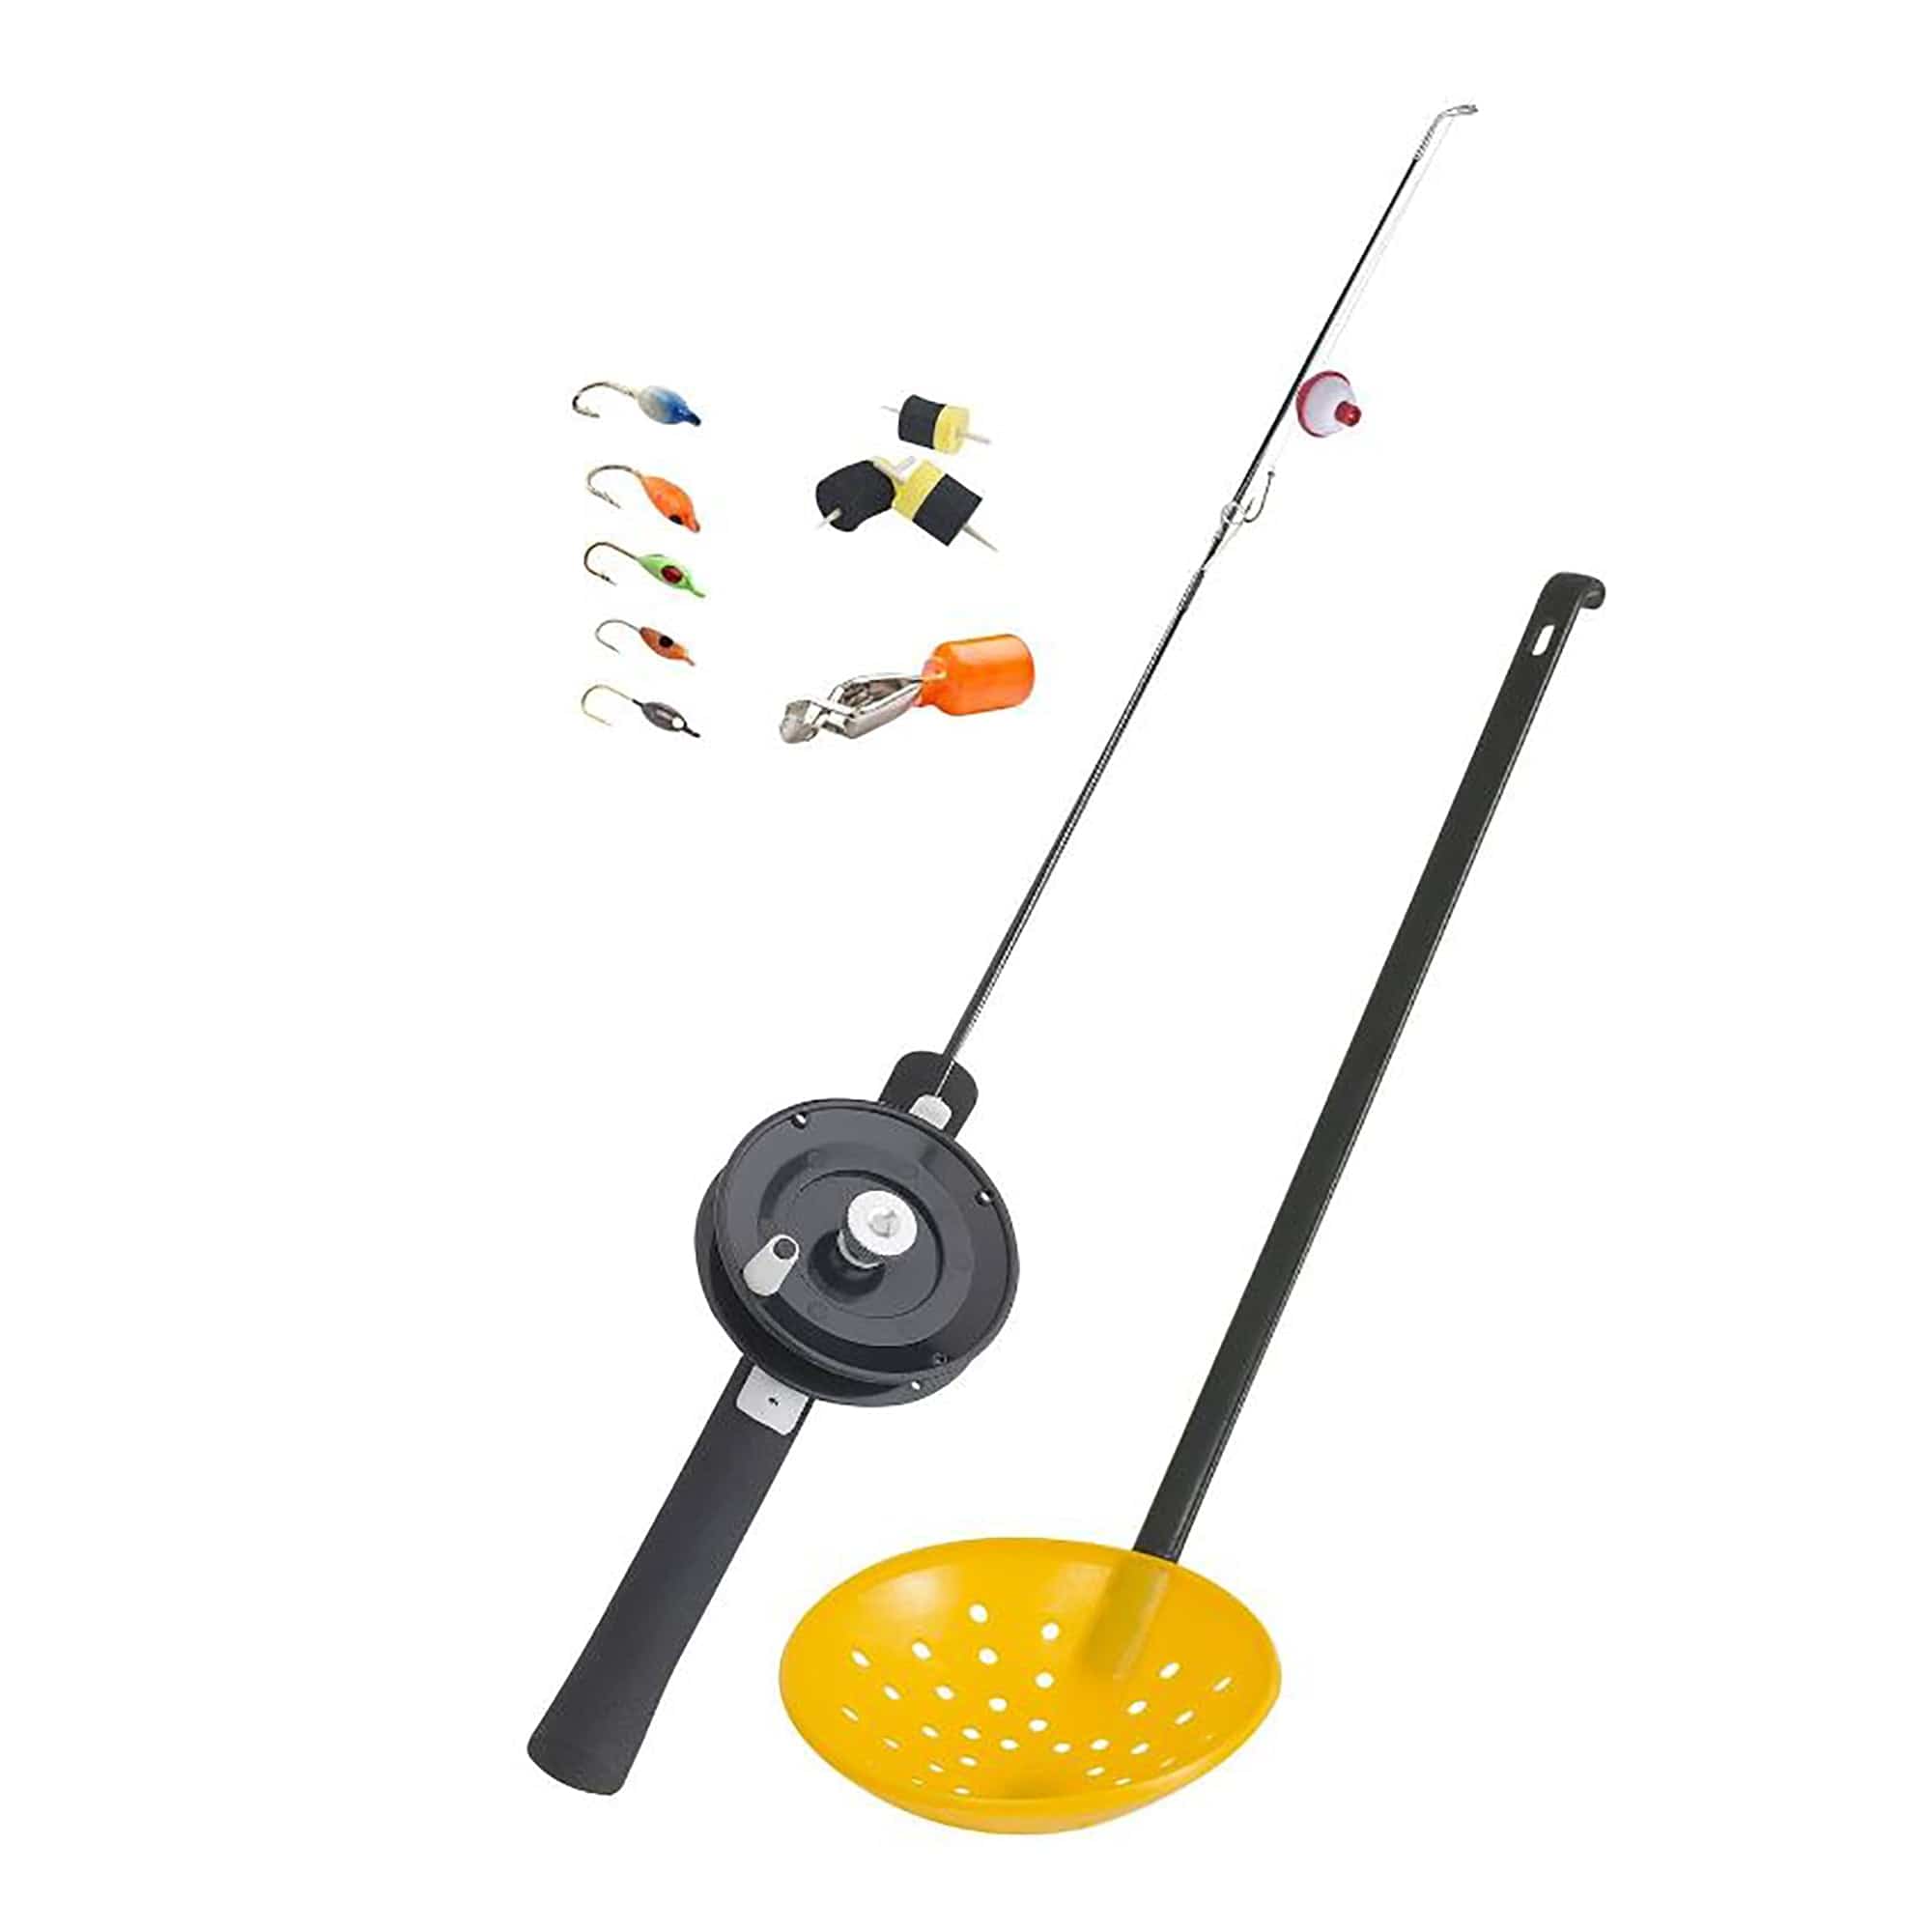 Celsius ITC-5A 24 Complete Ice Fishing Kit